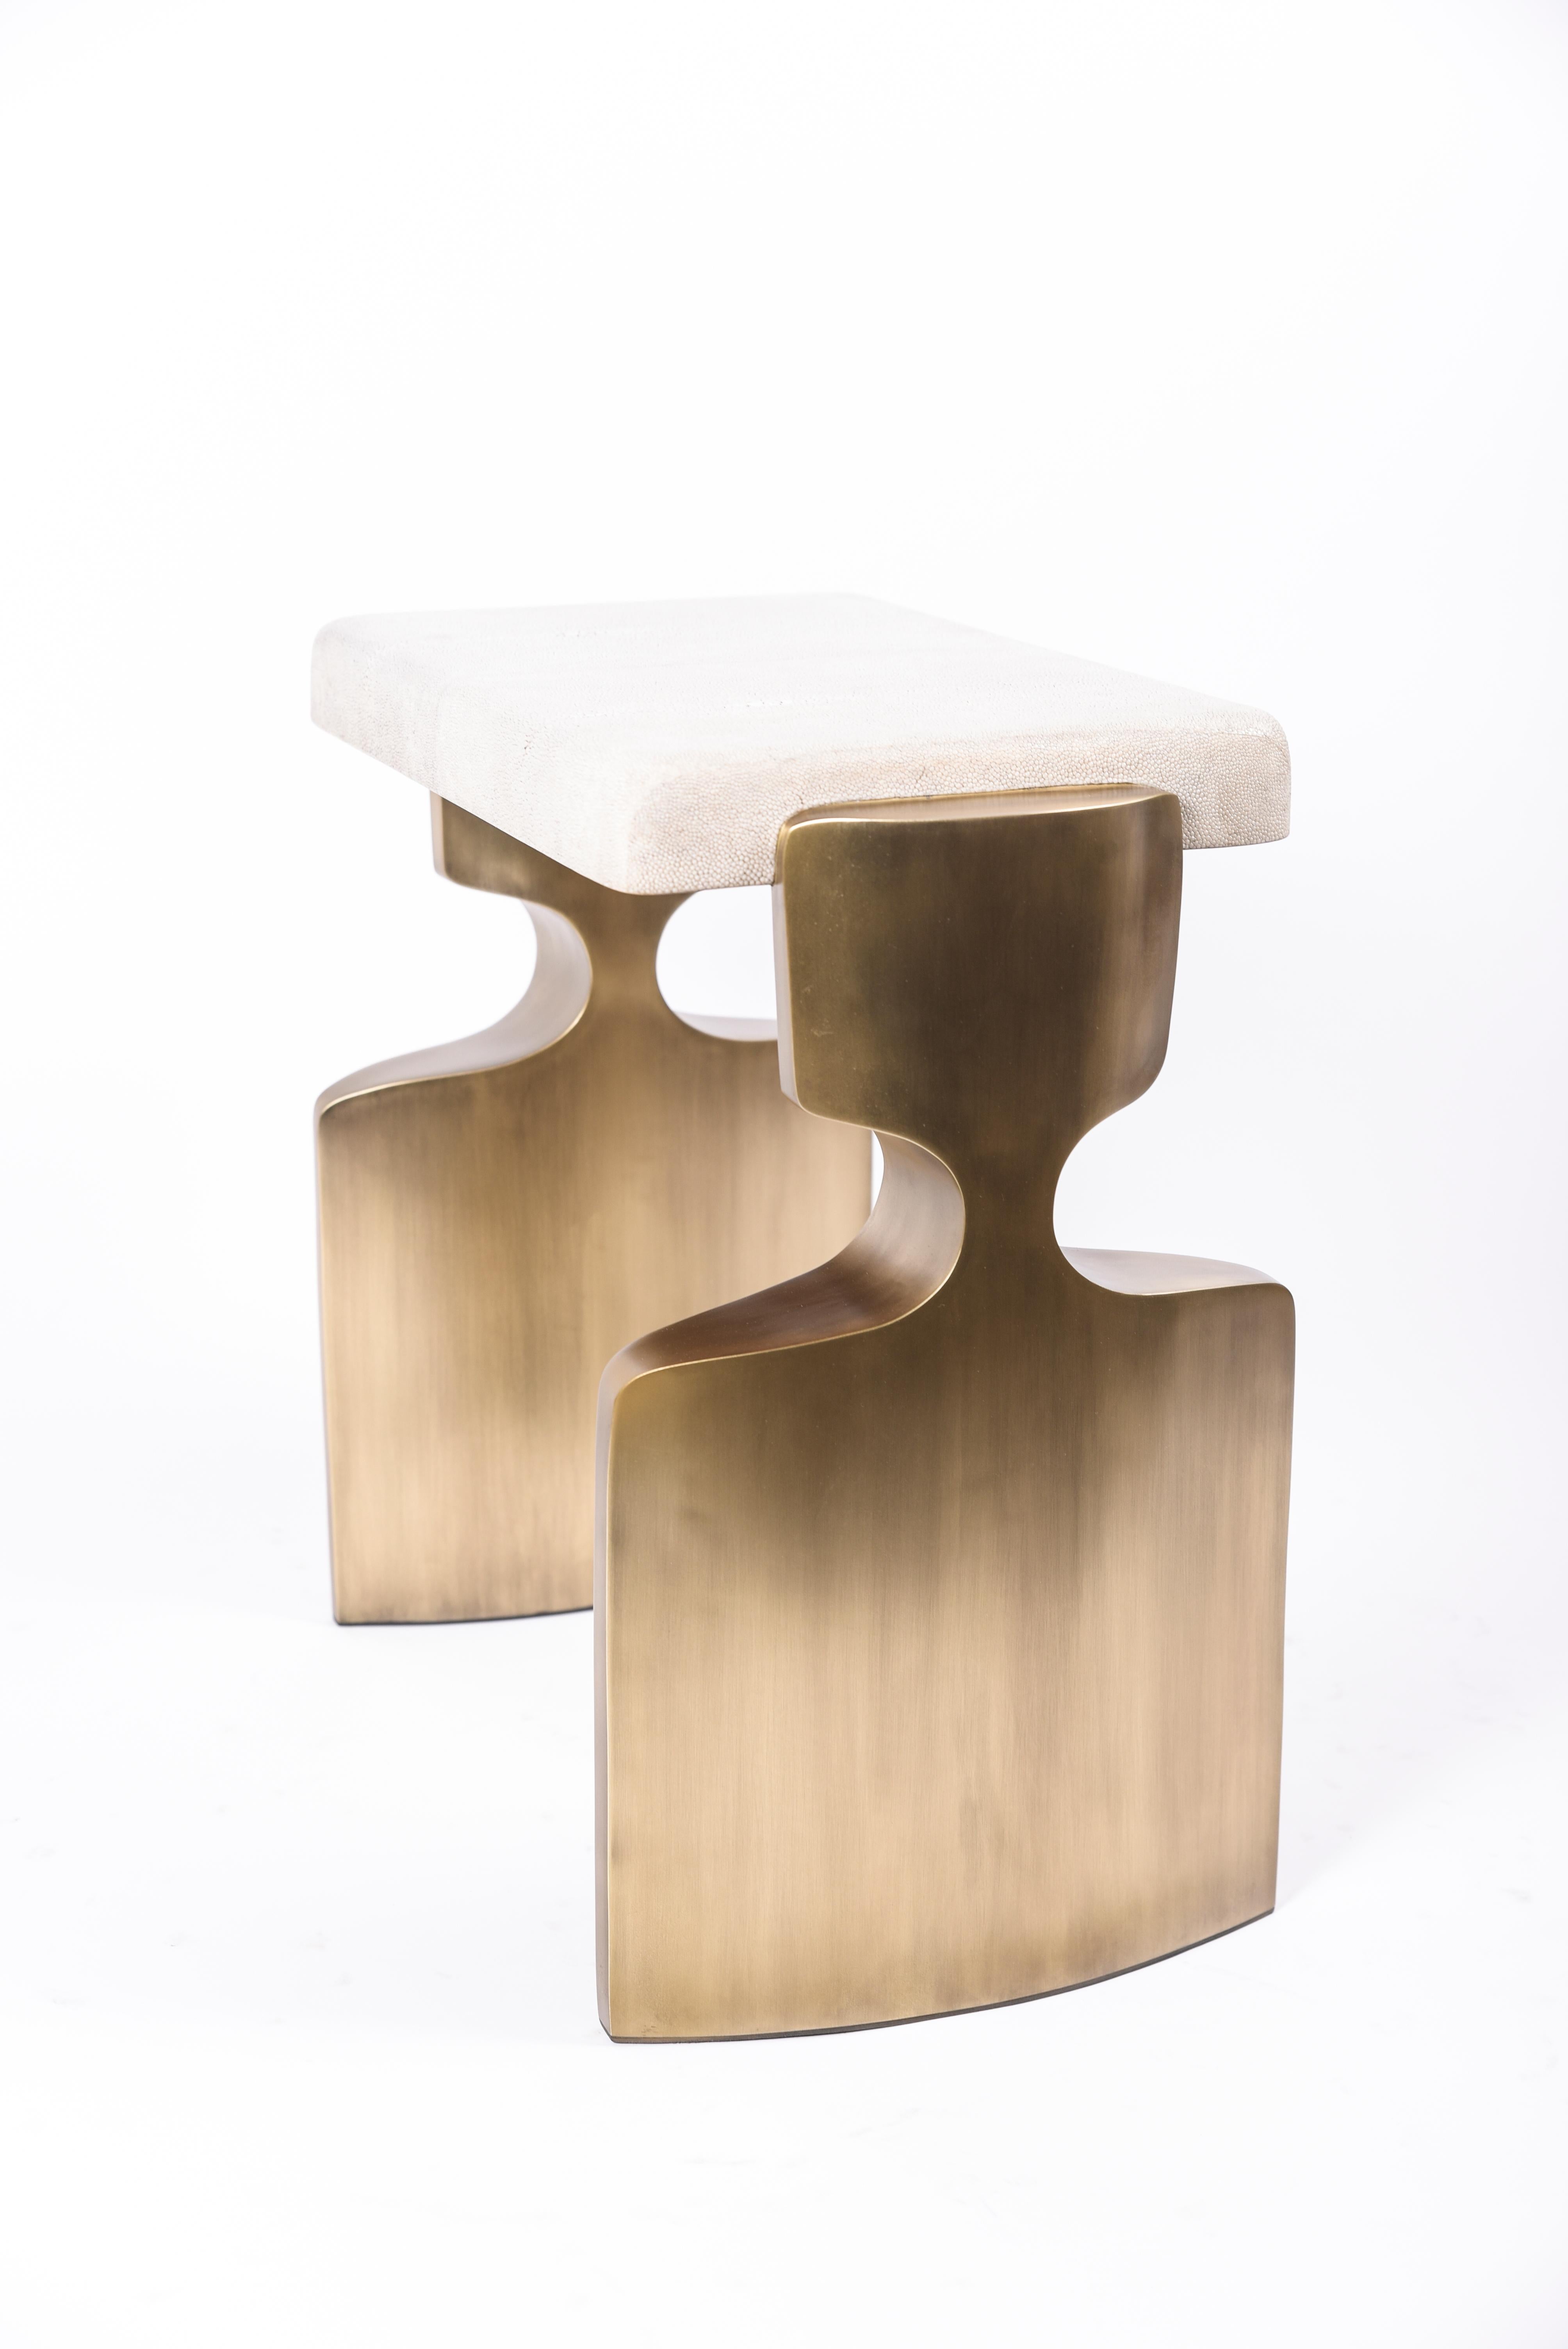 The Carmen stool is a stunning seating piece. The cream shagreen inlaid top sits on a pair of sculptural bronze-patina brass legs that frame the piece. Custom color/sizing available on request. A bench version is also available, image at end of